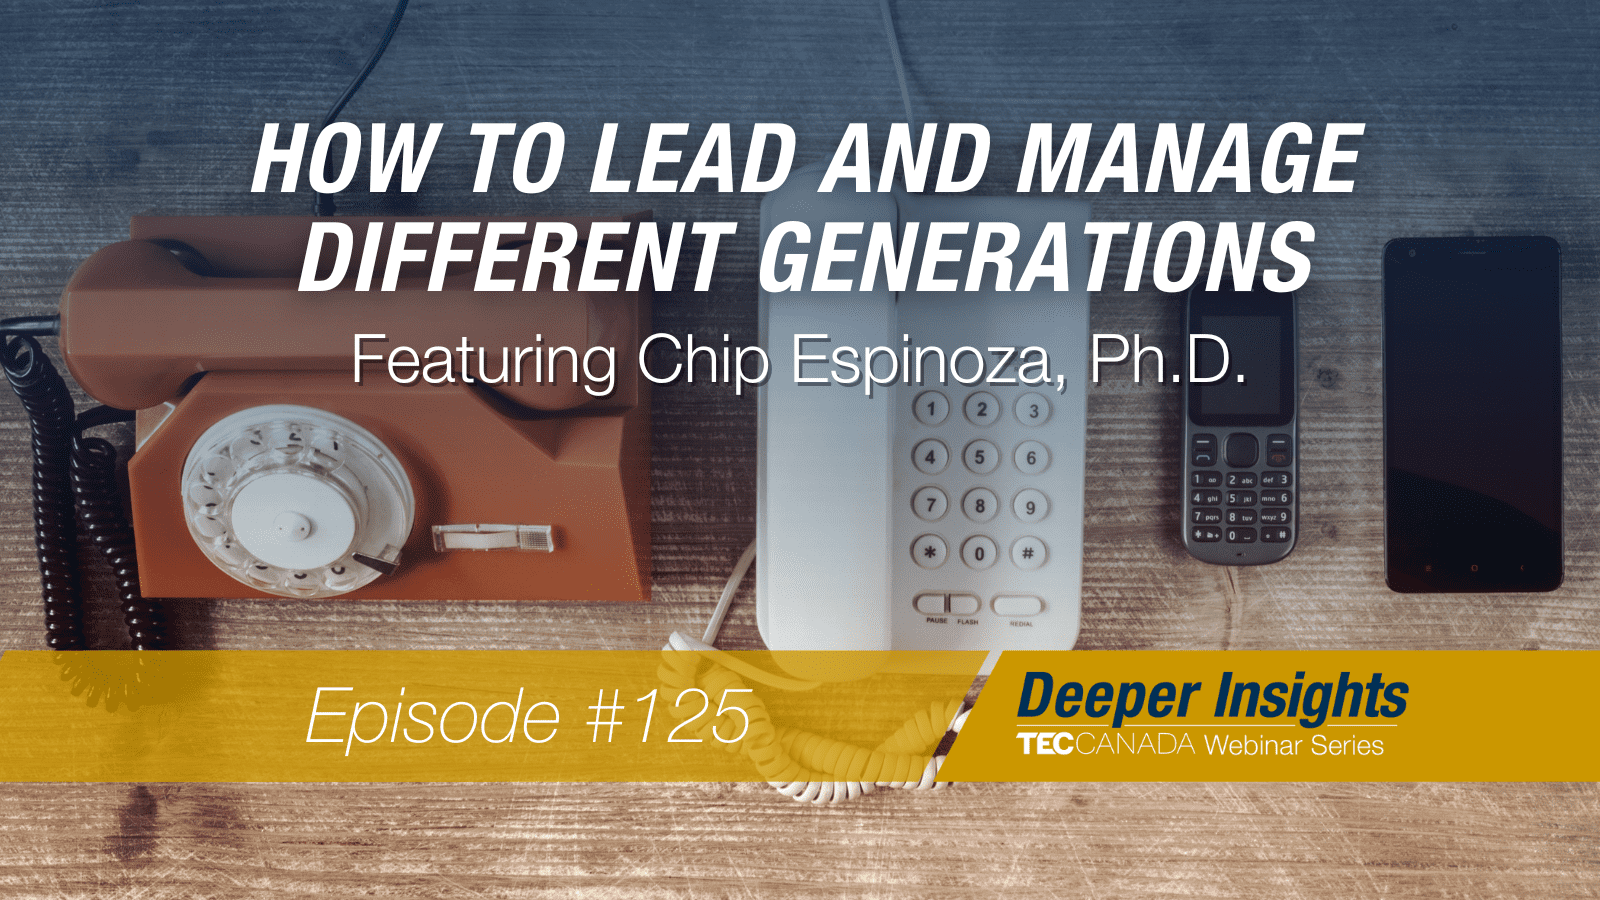 How to Lead and Manage Different Generations Effectively